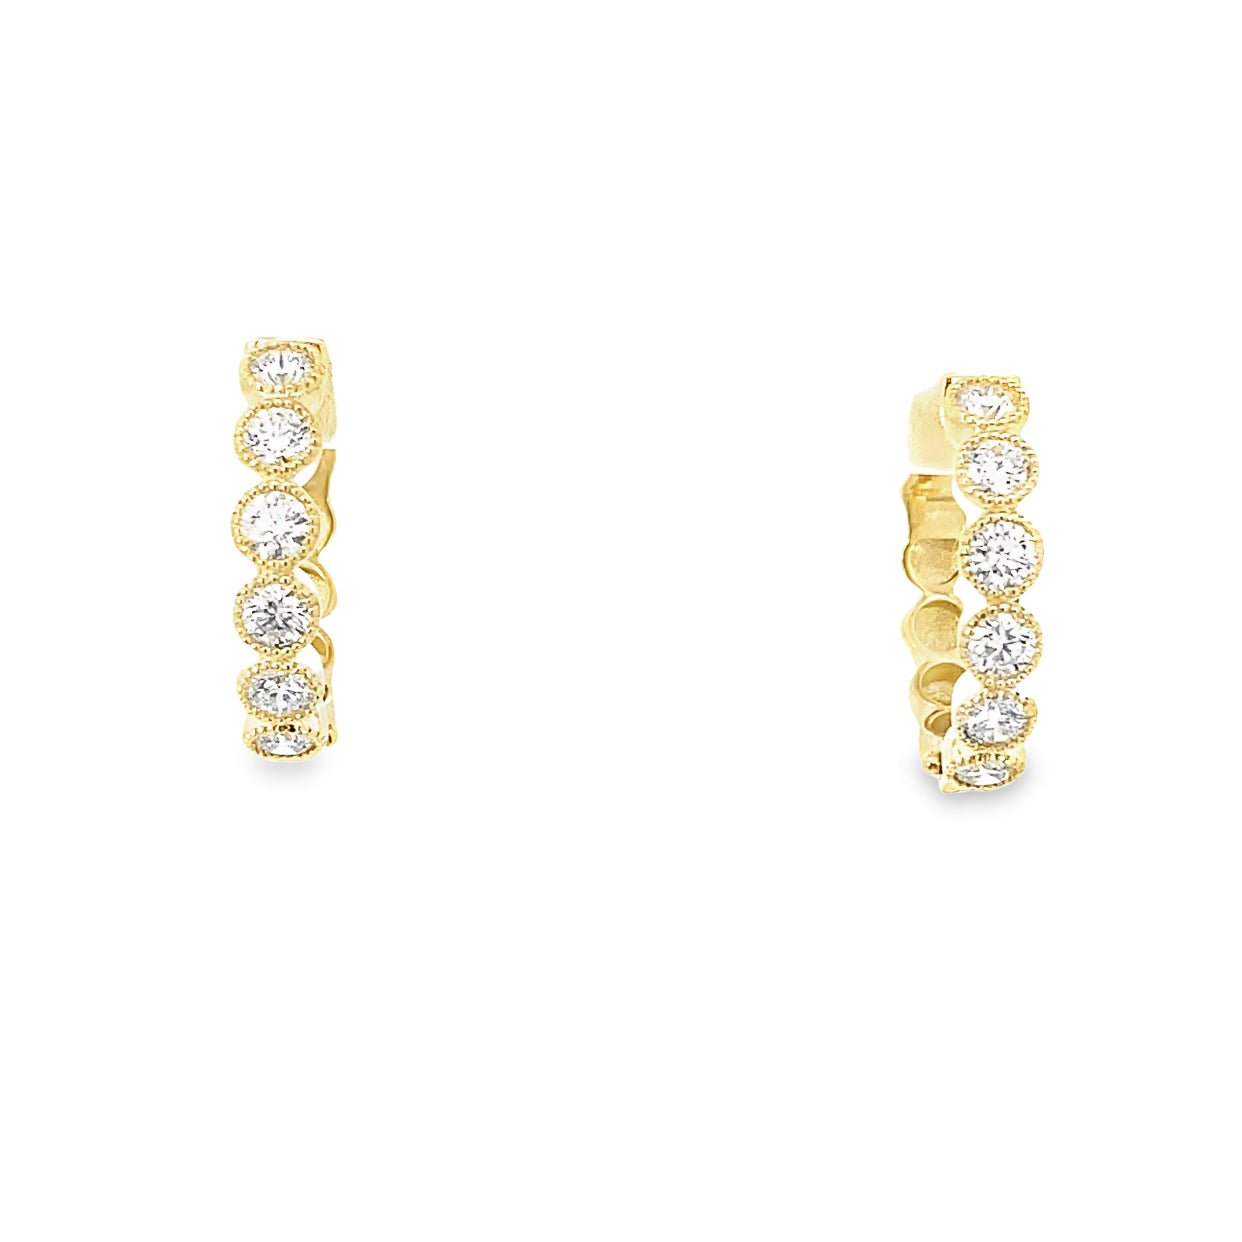 Earrings diamond hoops set in coin edge bezels 14kt yellow gold - Gaines Jewelers